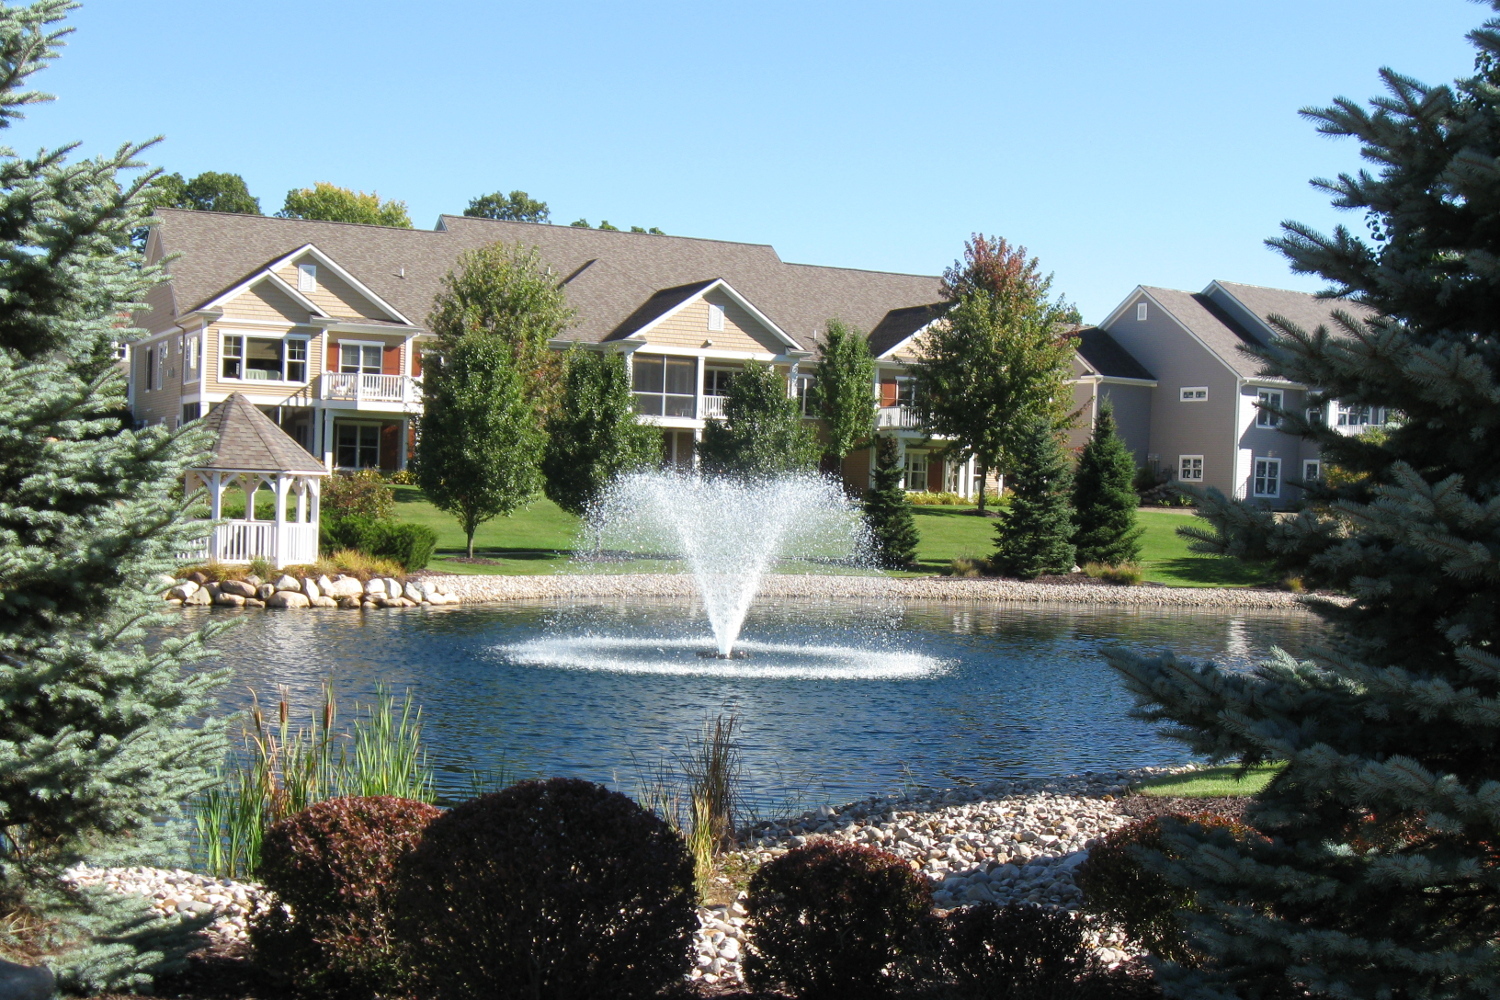 An Otterbine Aerating Fountain in a residential area